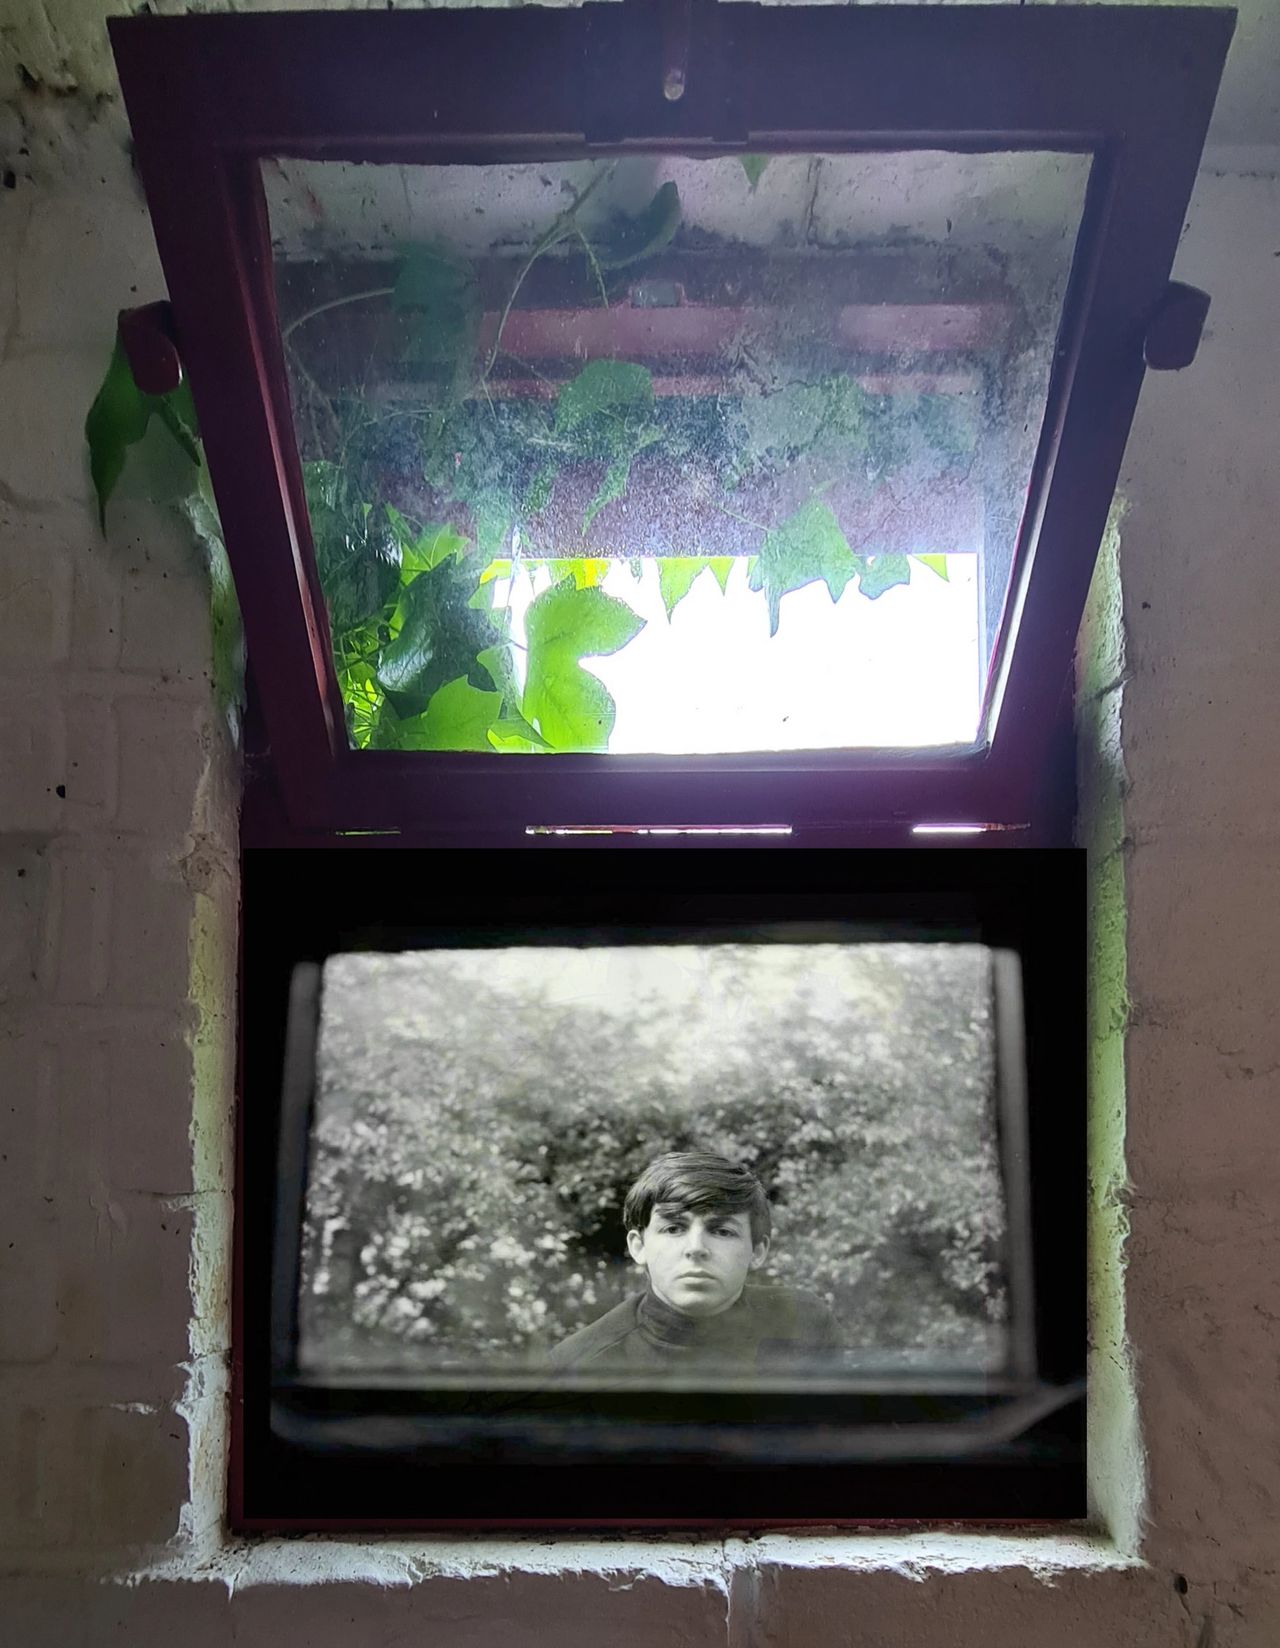 Mike McCartney photo of Paul looking through window of the outhouse. Photo overlay by Mark Ashworth.